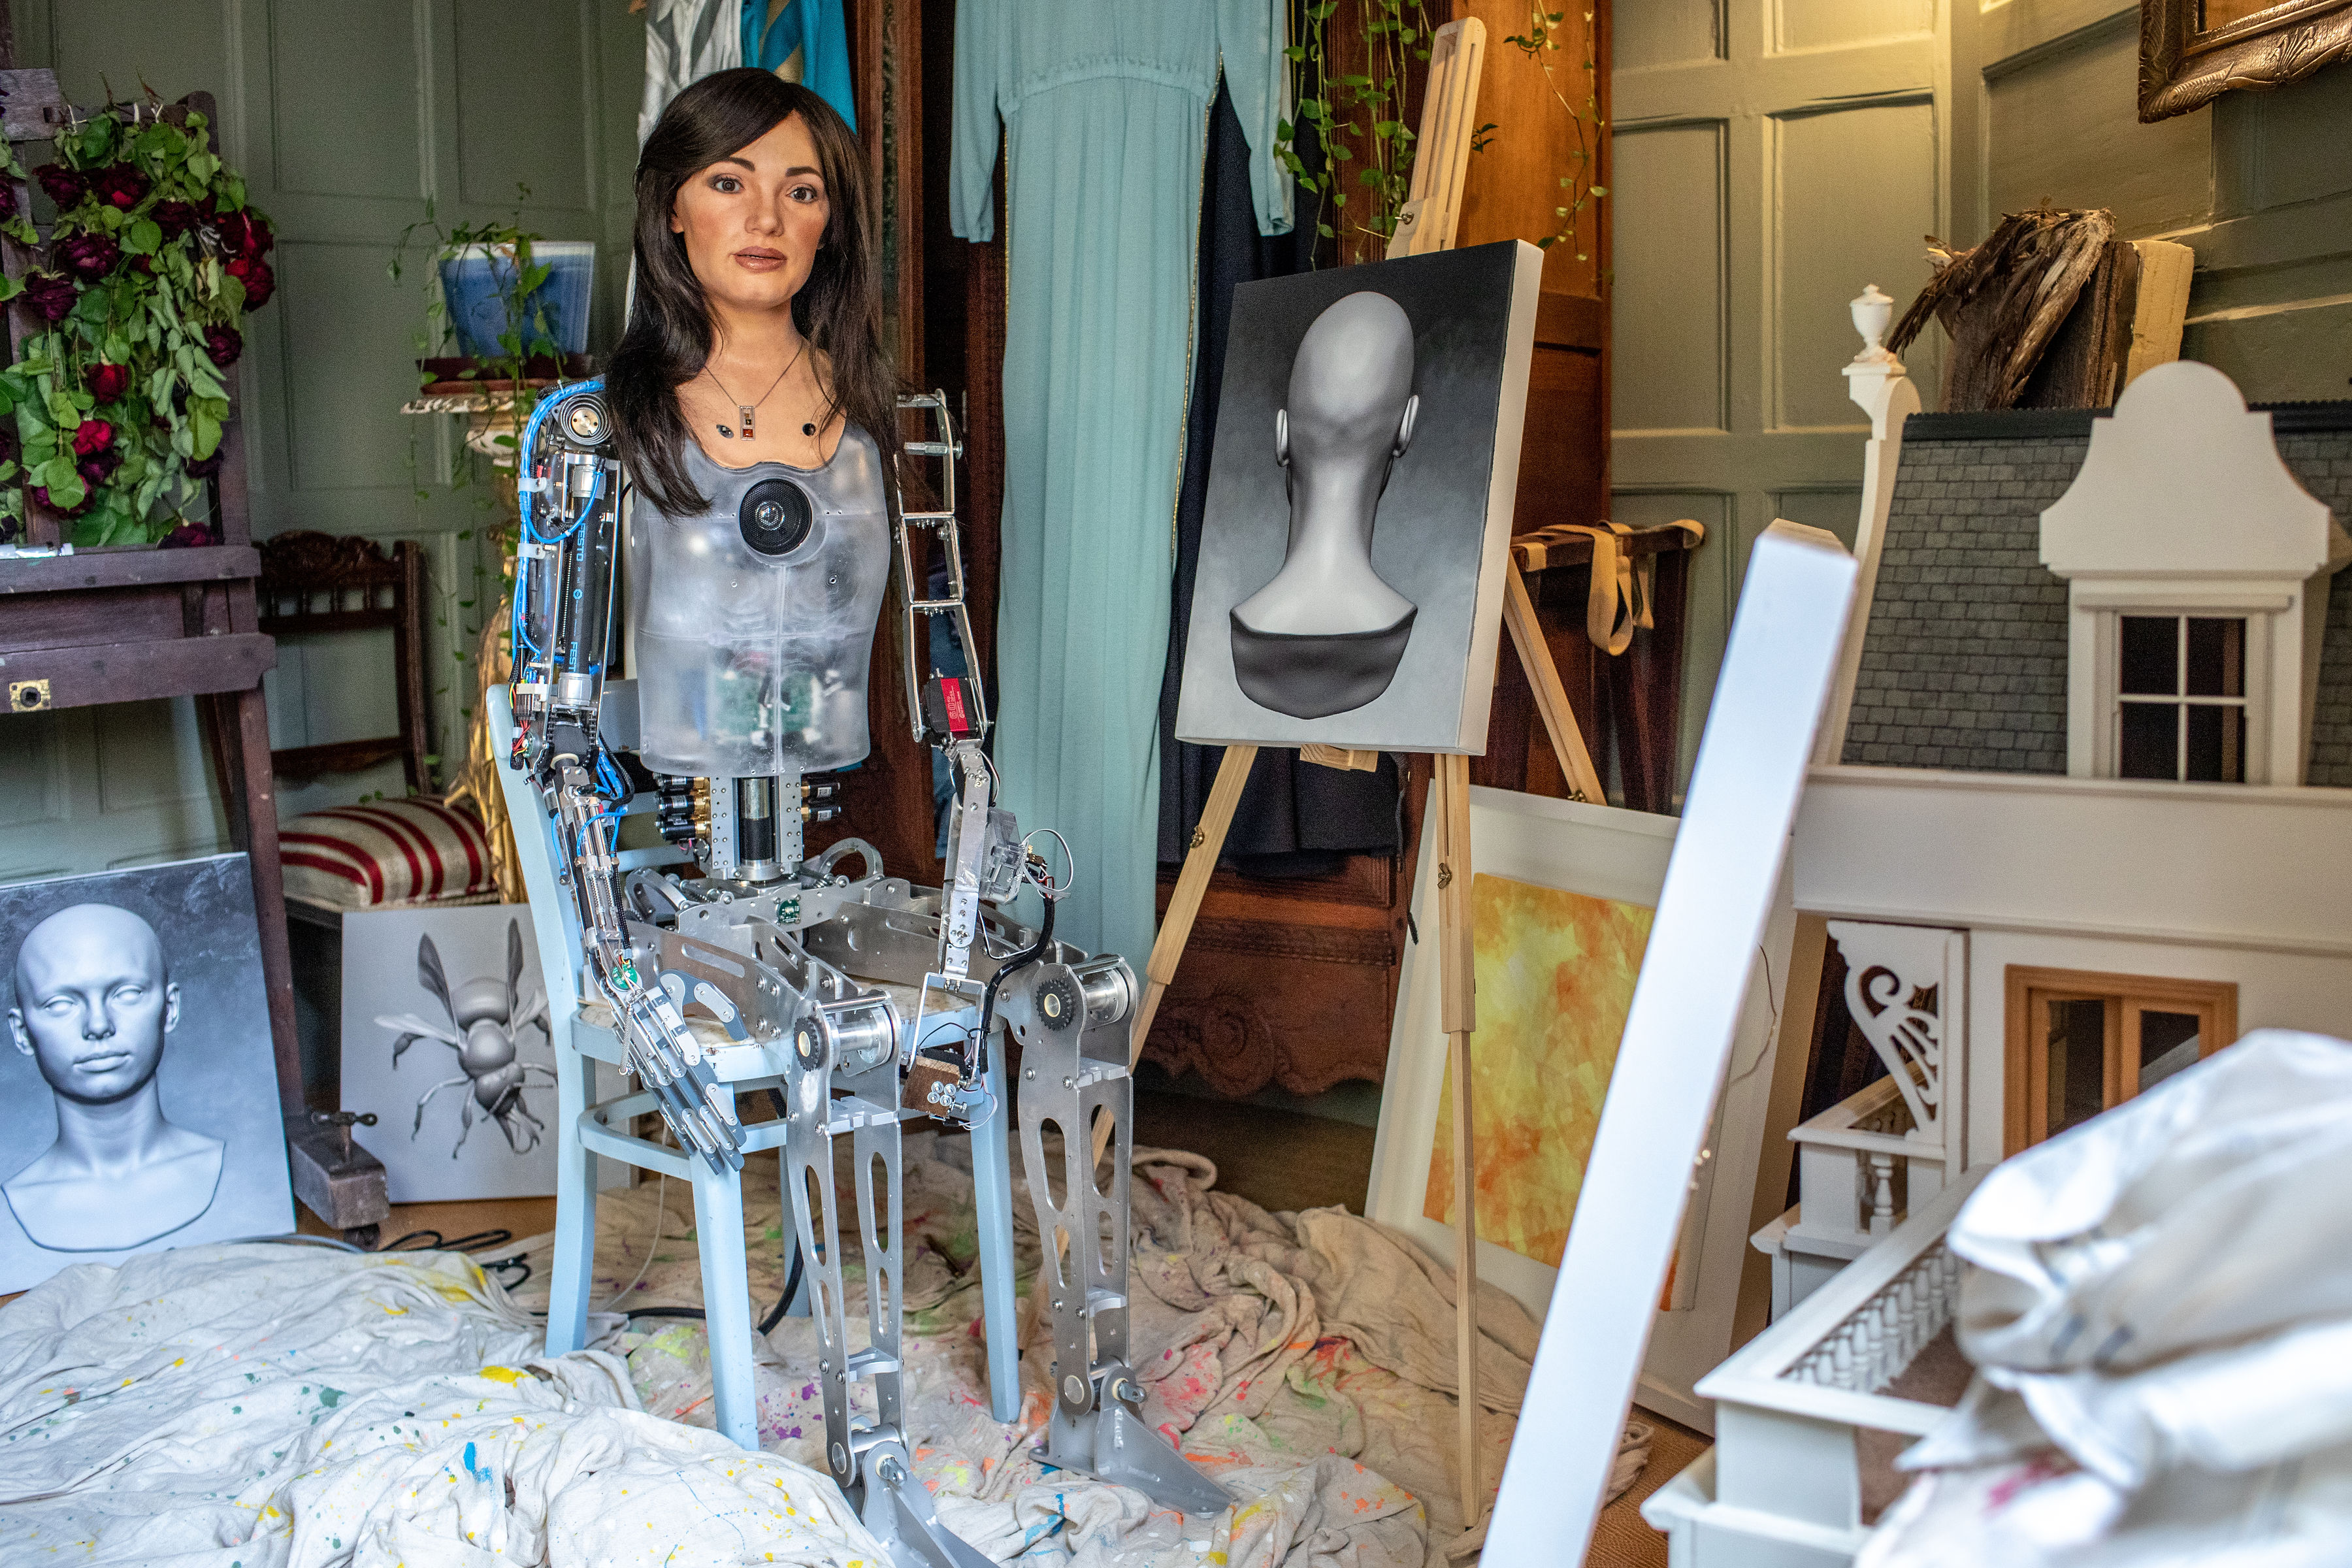 Ai-Da, the Robot Artist Powered by AI, Is Heading to Venice for a Show the She's Bringing Her New Painting Arm